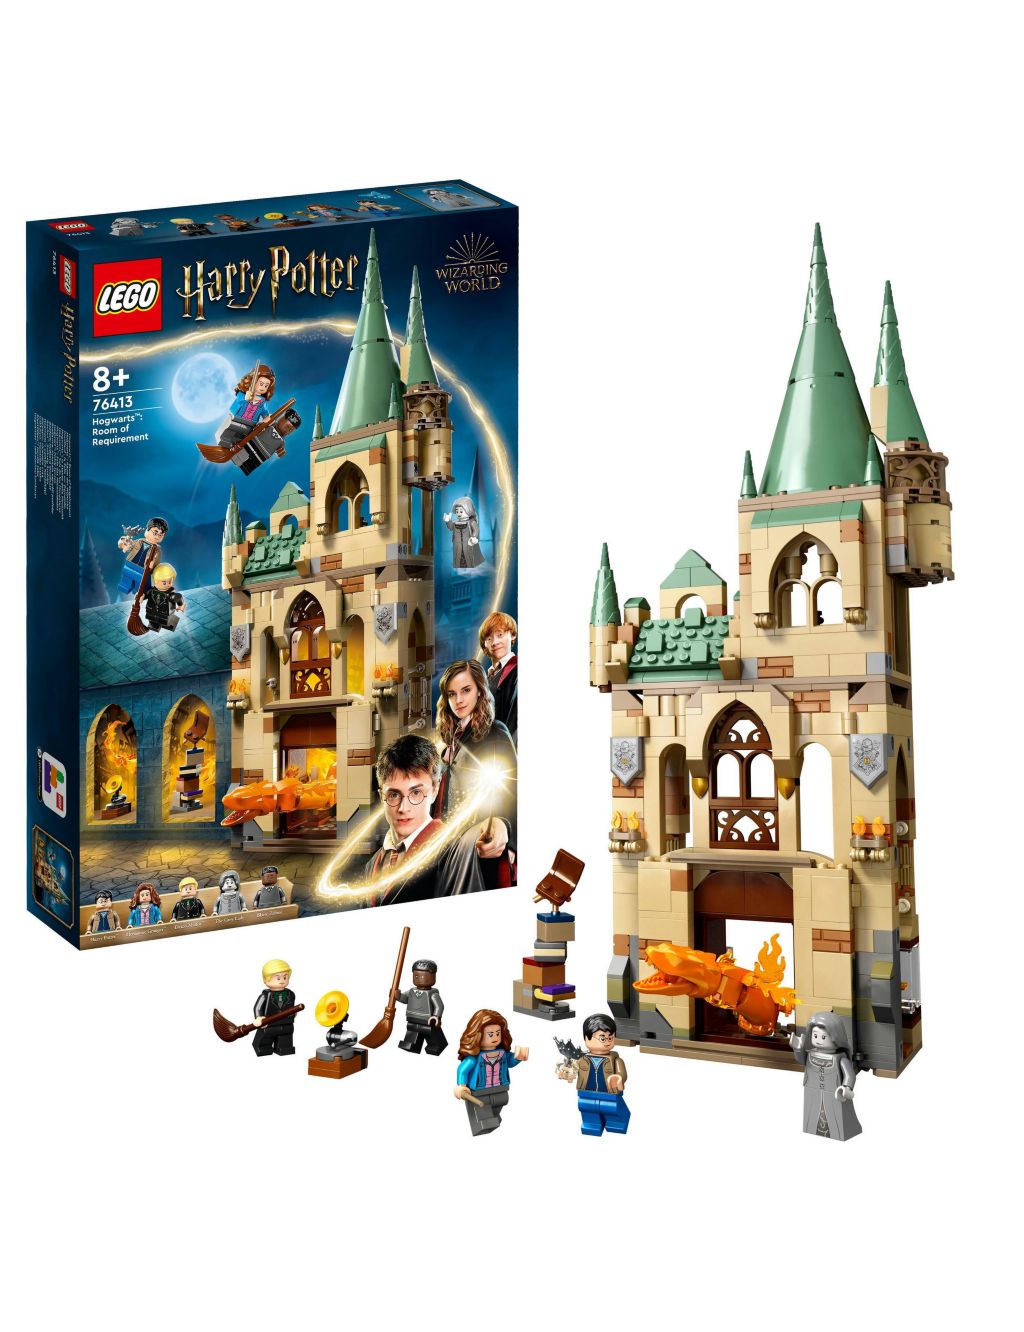 LEGO Harry Potter Hogwarts: Room of Requirement 76413 (8+ Yrs)